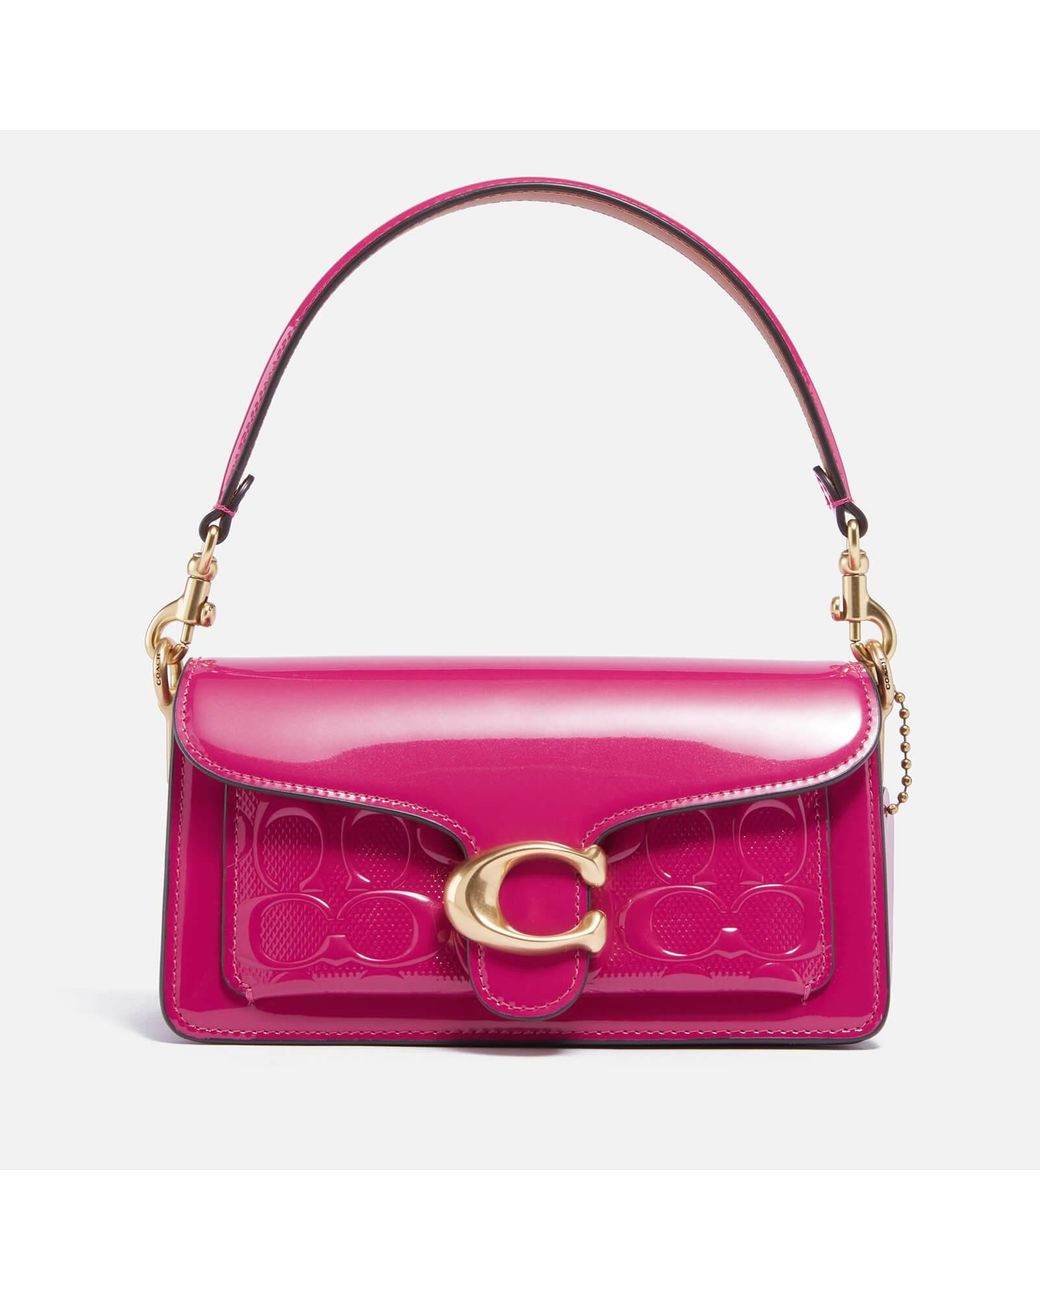 COACH Tabby Shoulder Bag 20 In Signature Leather in Purple | Lyst Australia